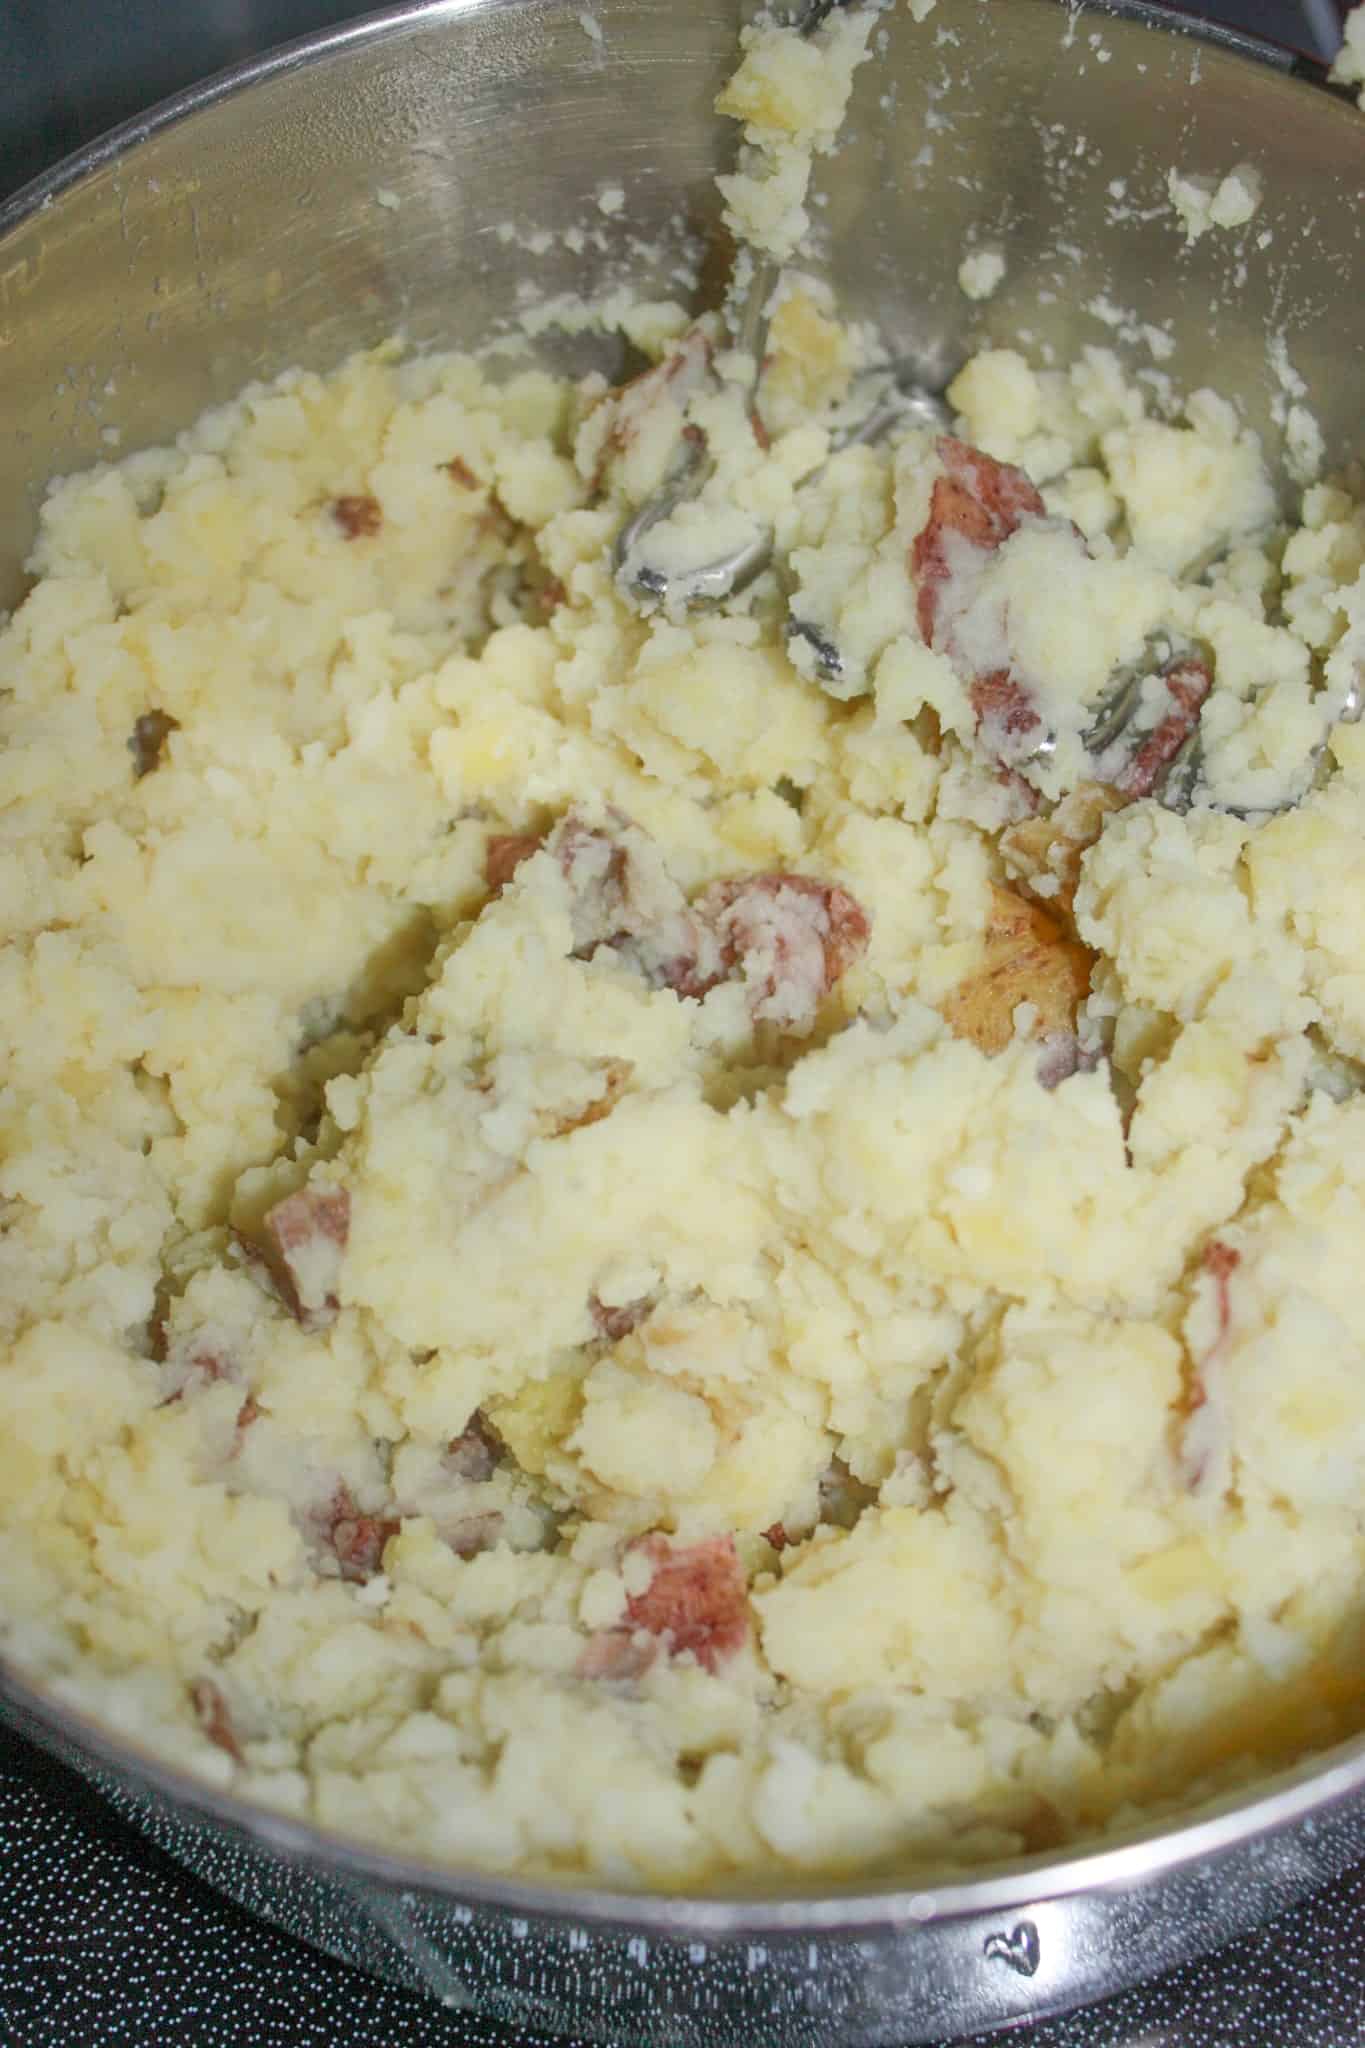 Mashed potatoes are a staple side dish in many of our homes.  Lazy Mashed Potatoes is a quick and easy recipe that skips the peeling and boiling steps. 